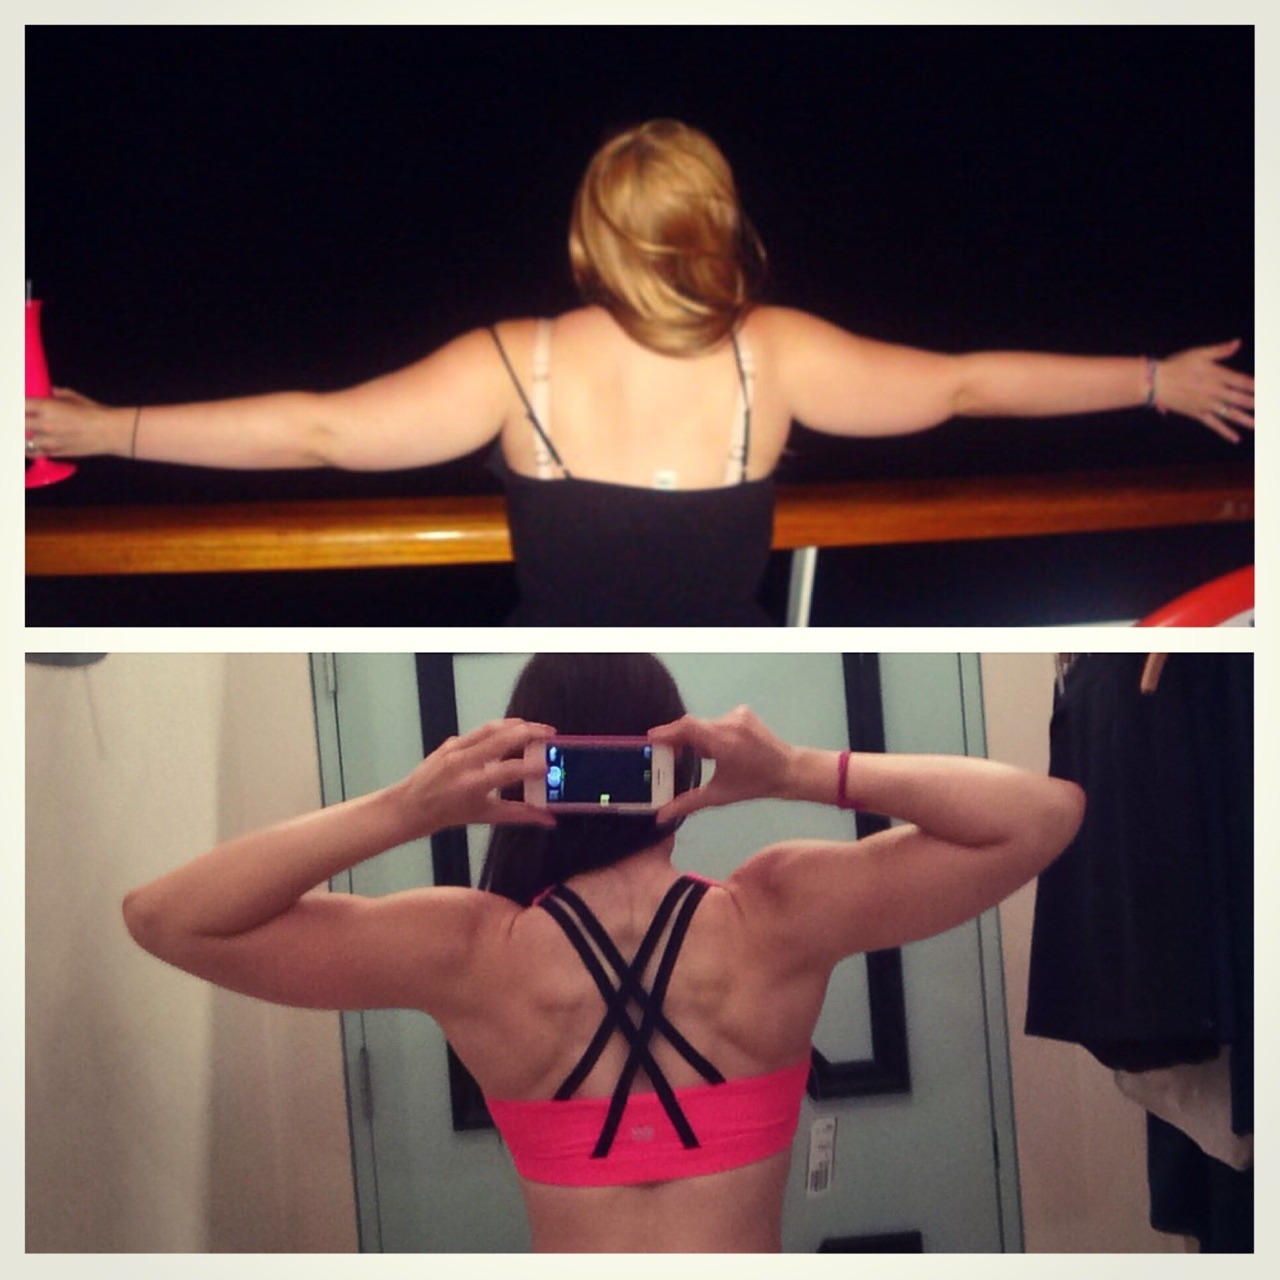 fit-and-skinny-kate:  Back transformation!